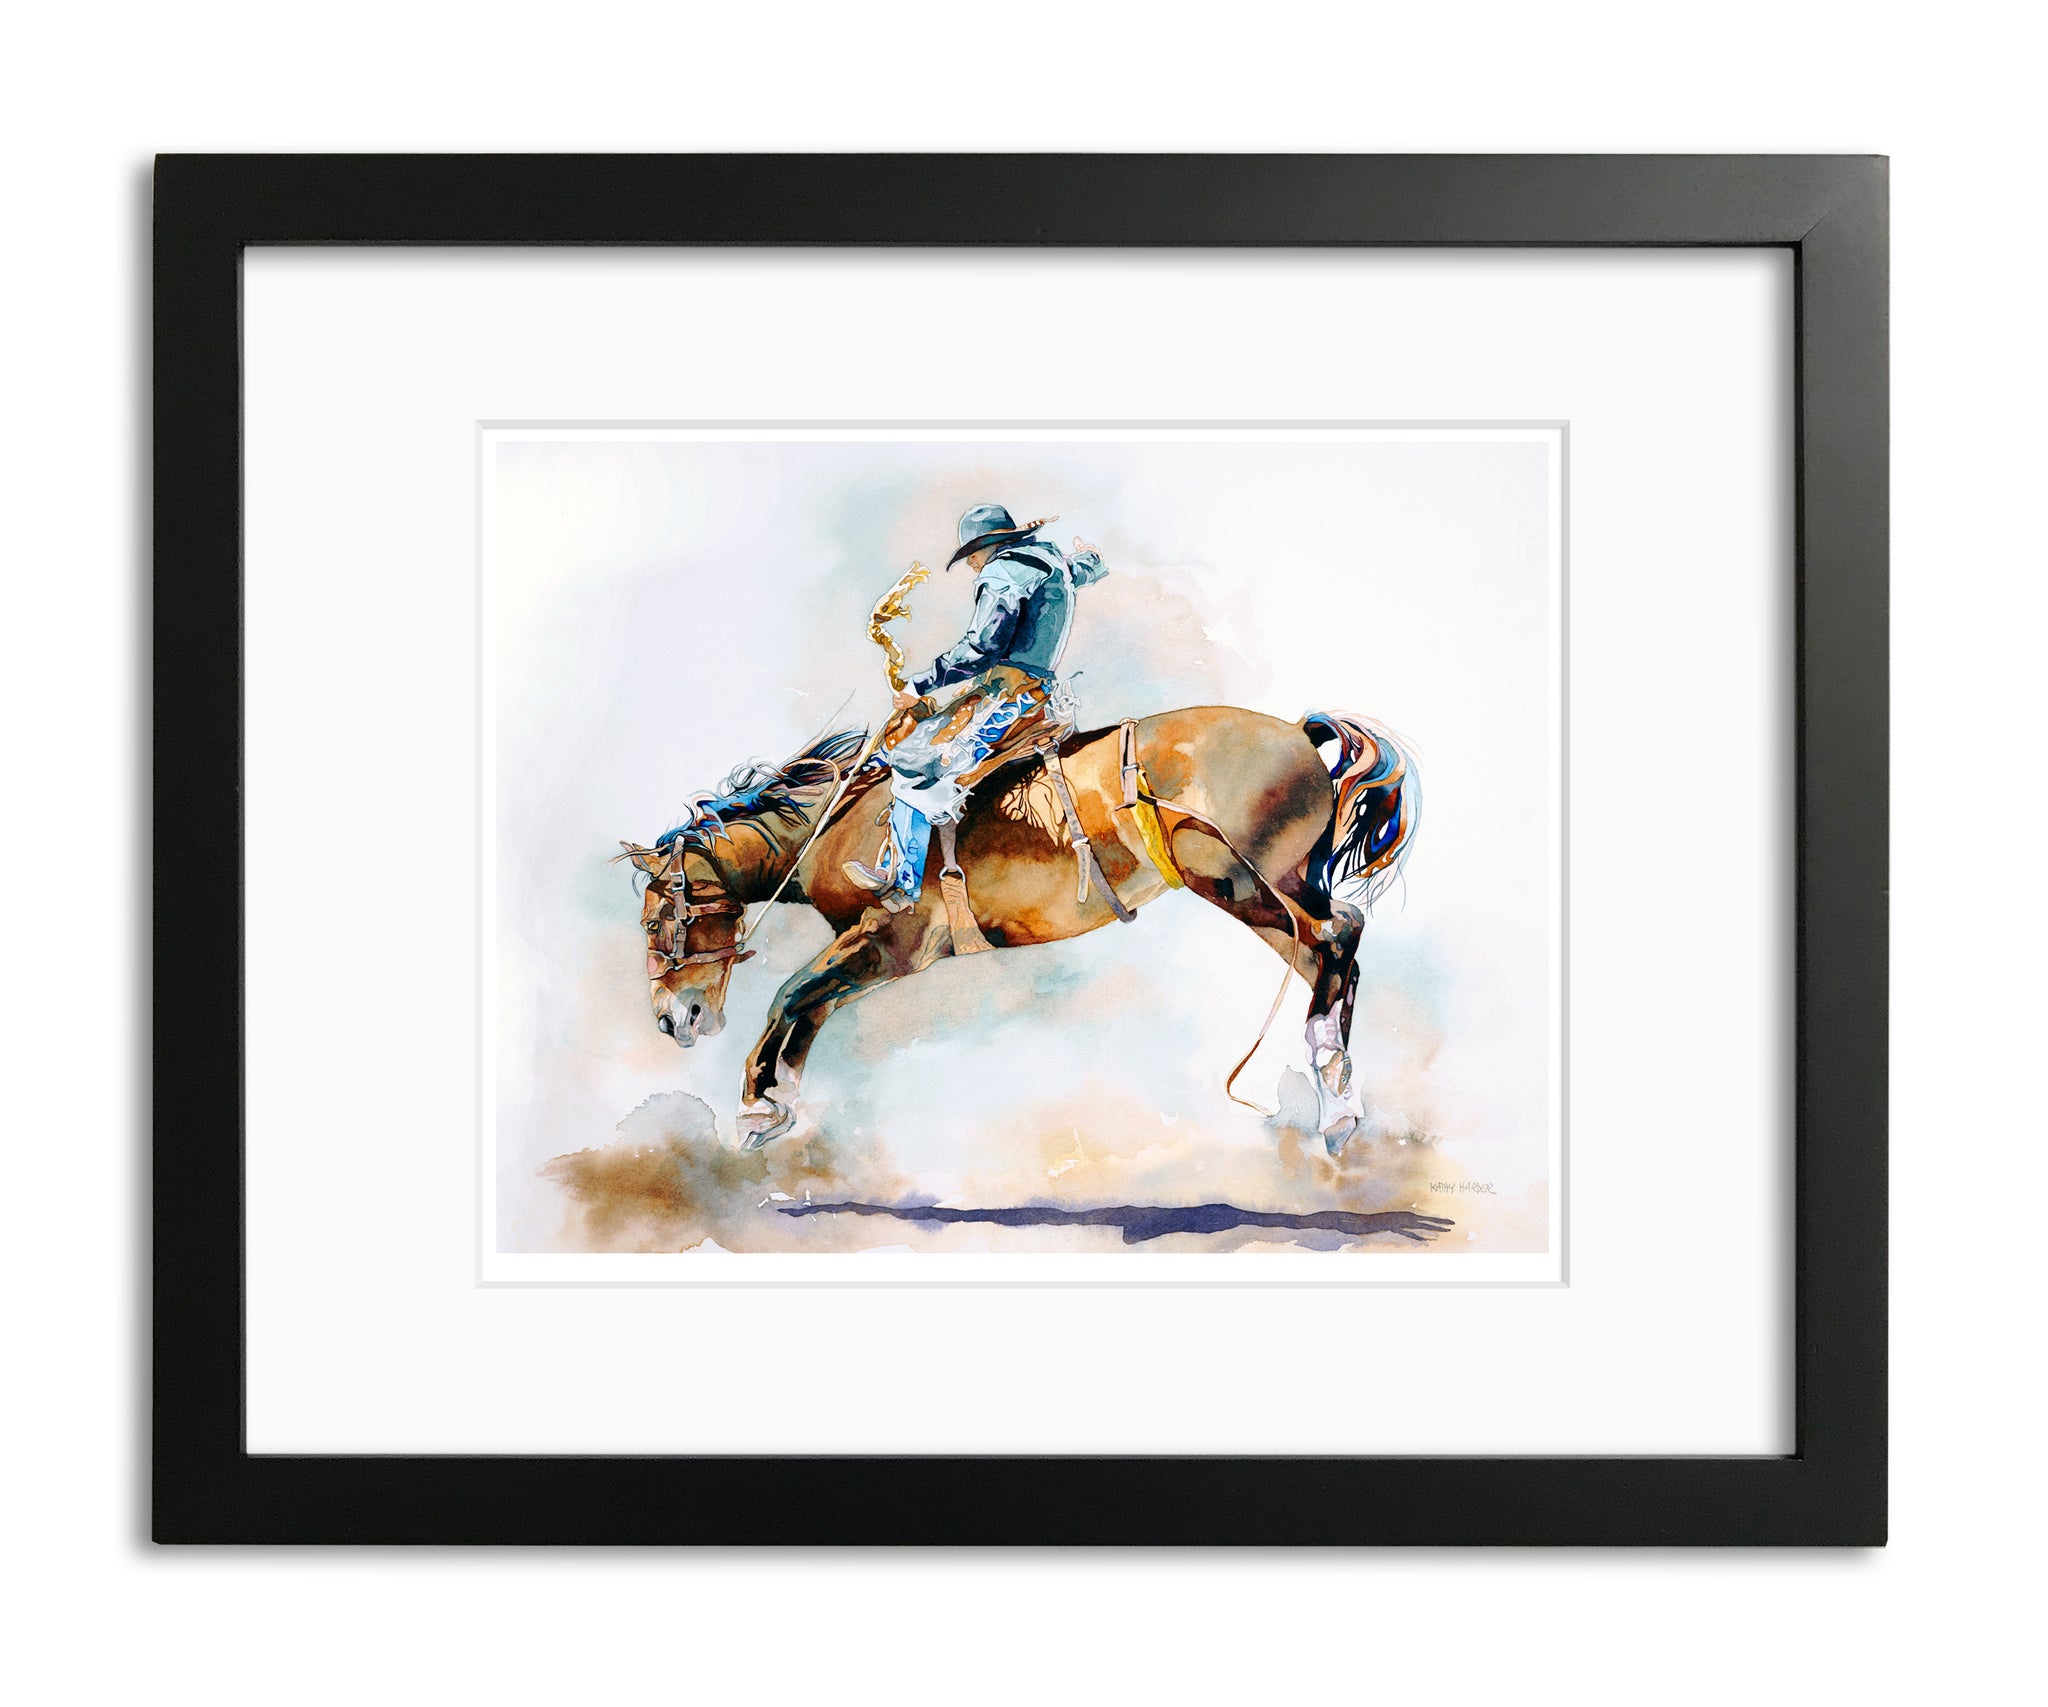 Romance of Rodeo by Kathy Harder, Limited Edition Print